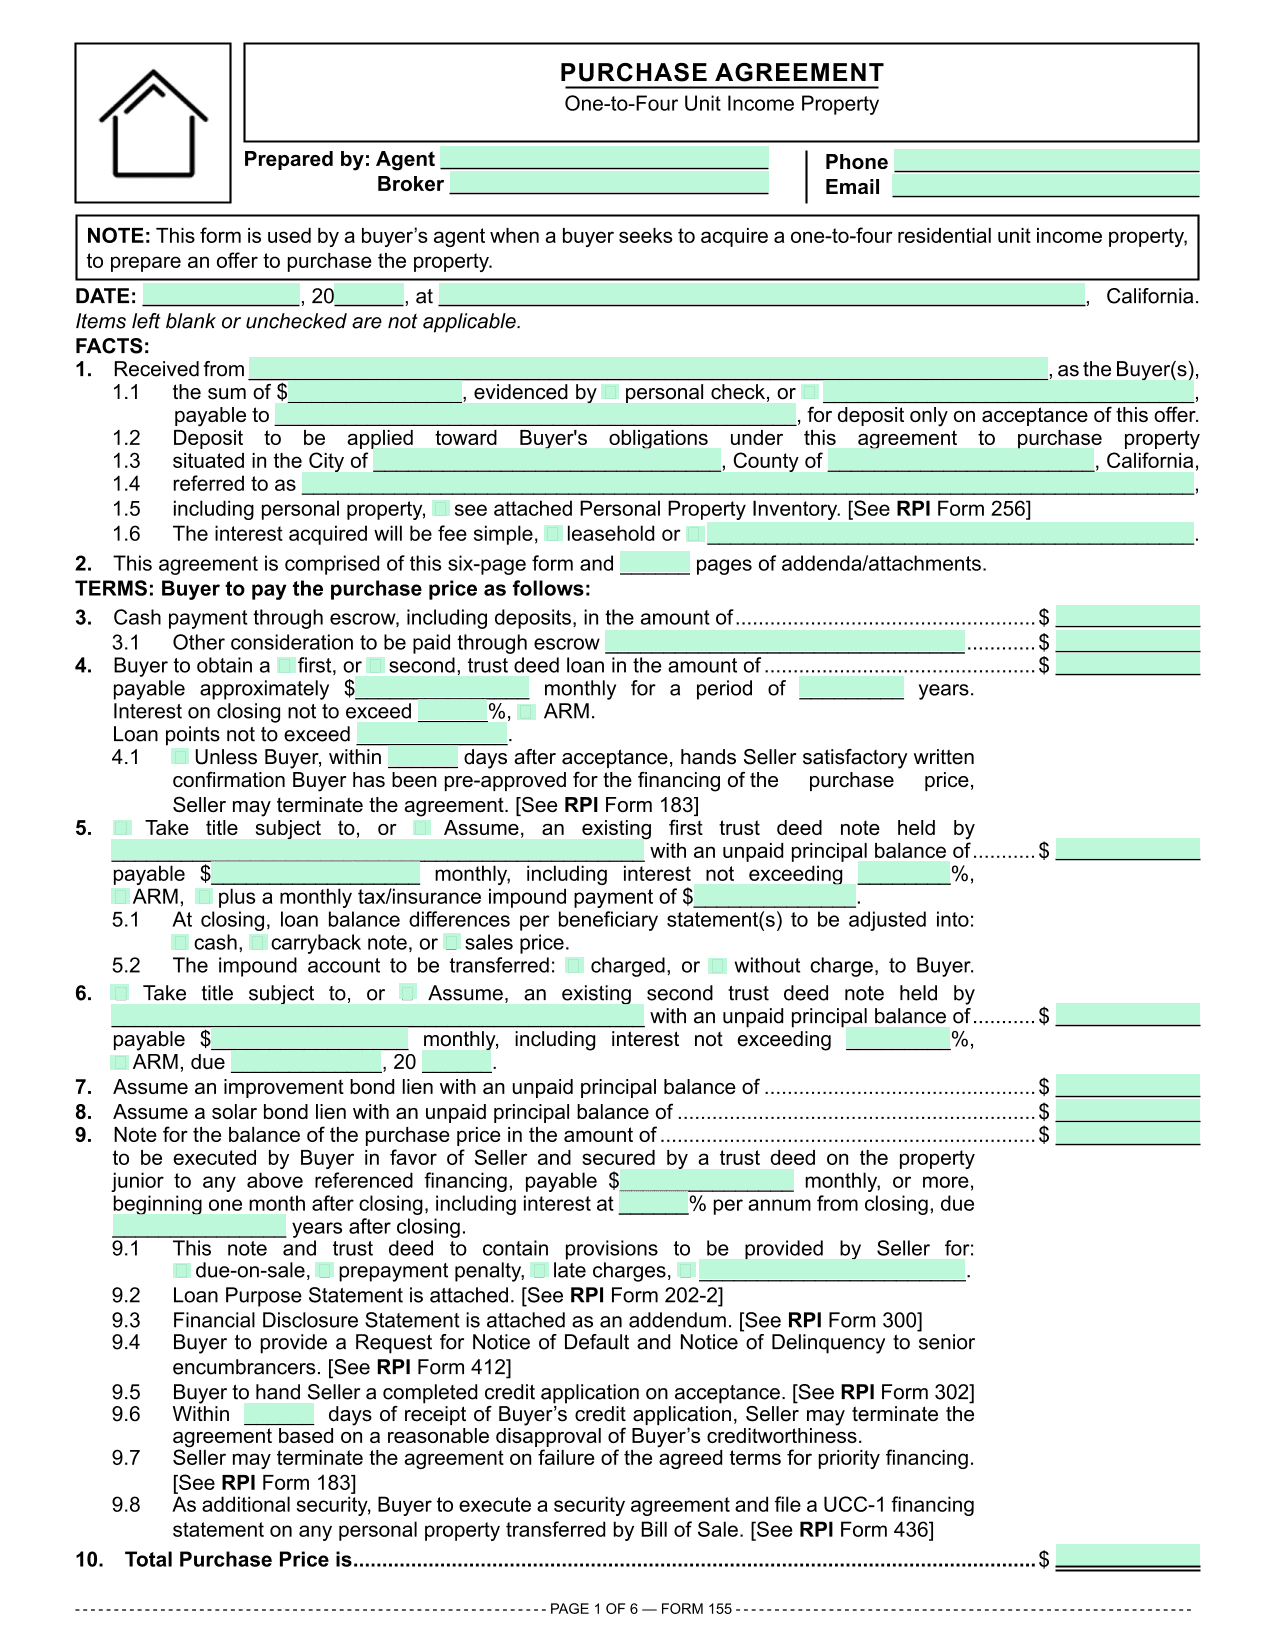 Residential Purchase Agreement (RPI 155) screenshot